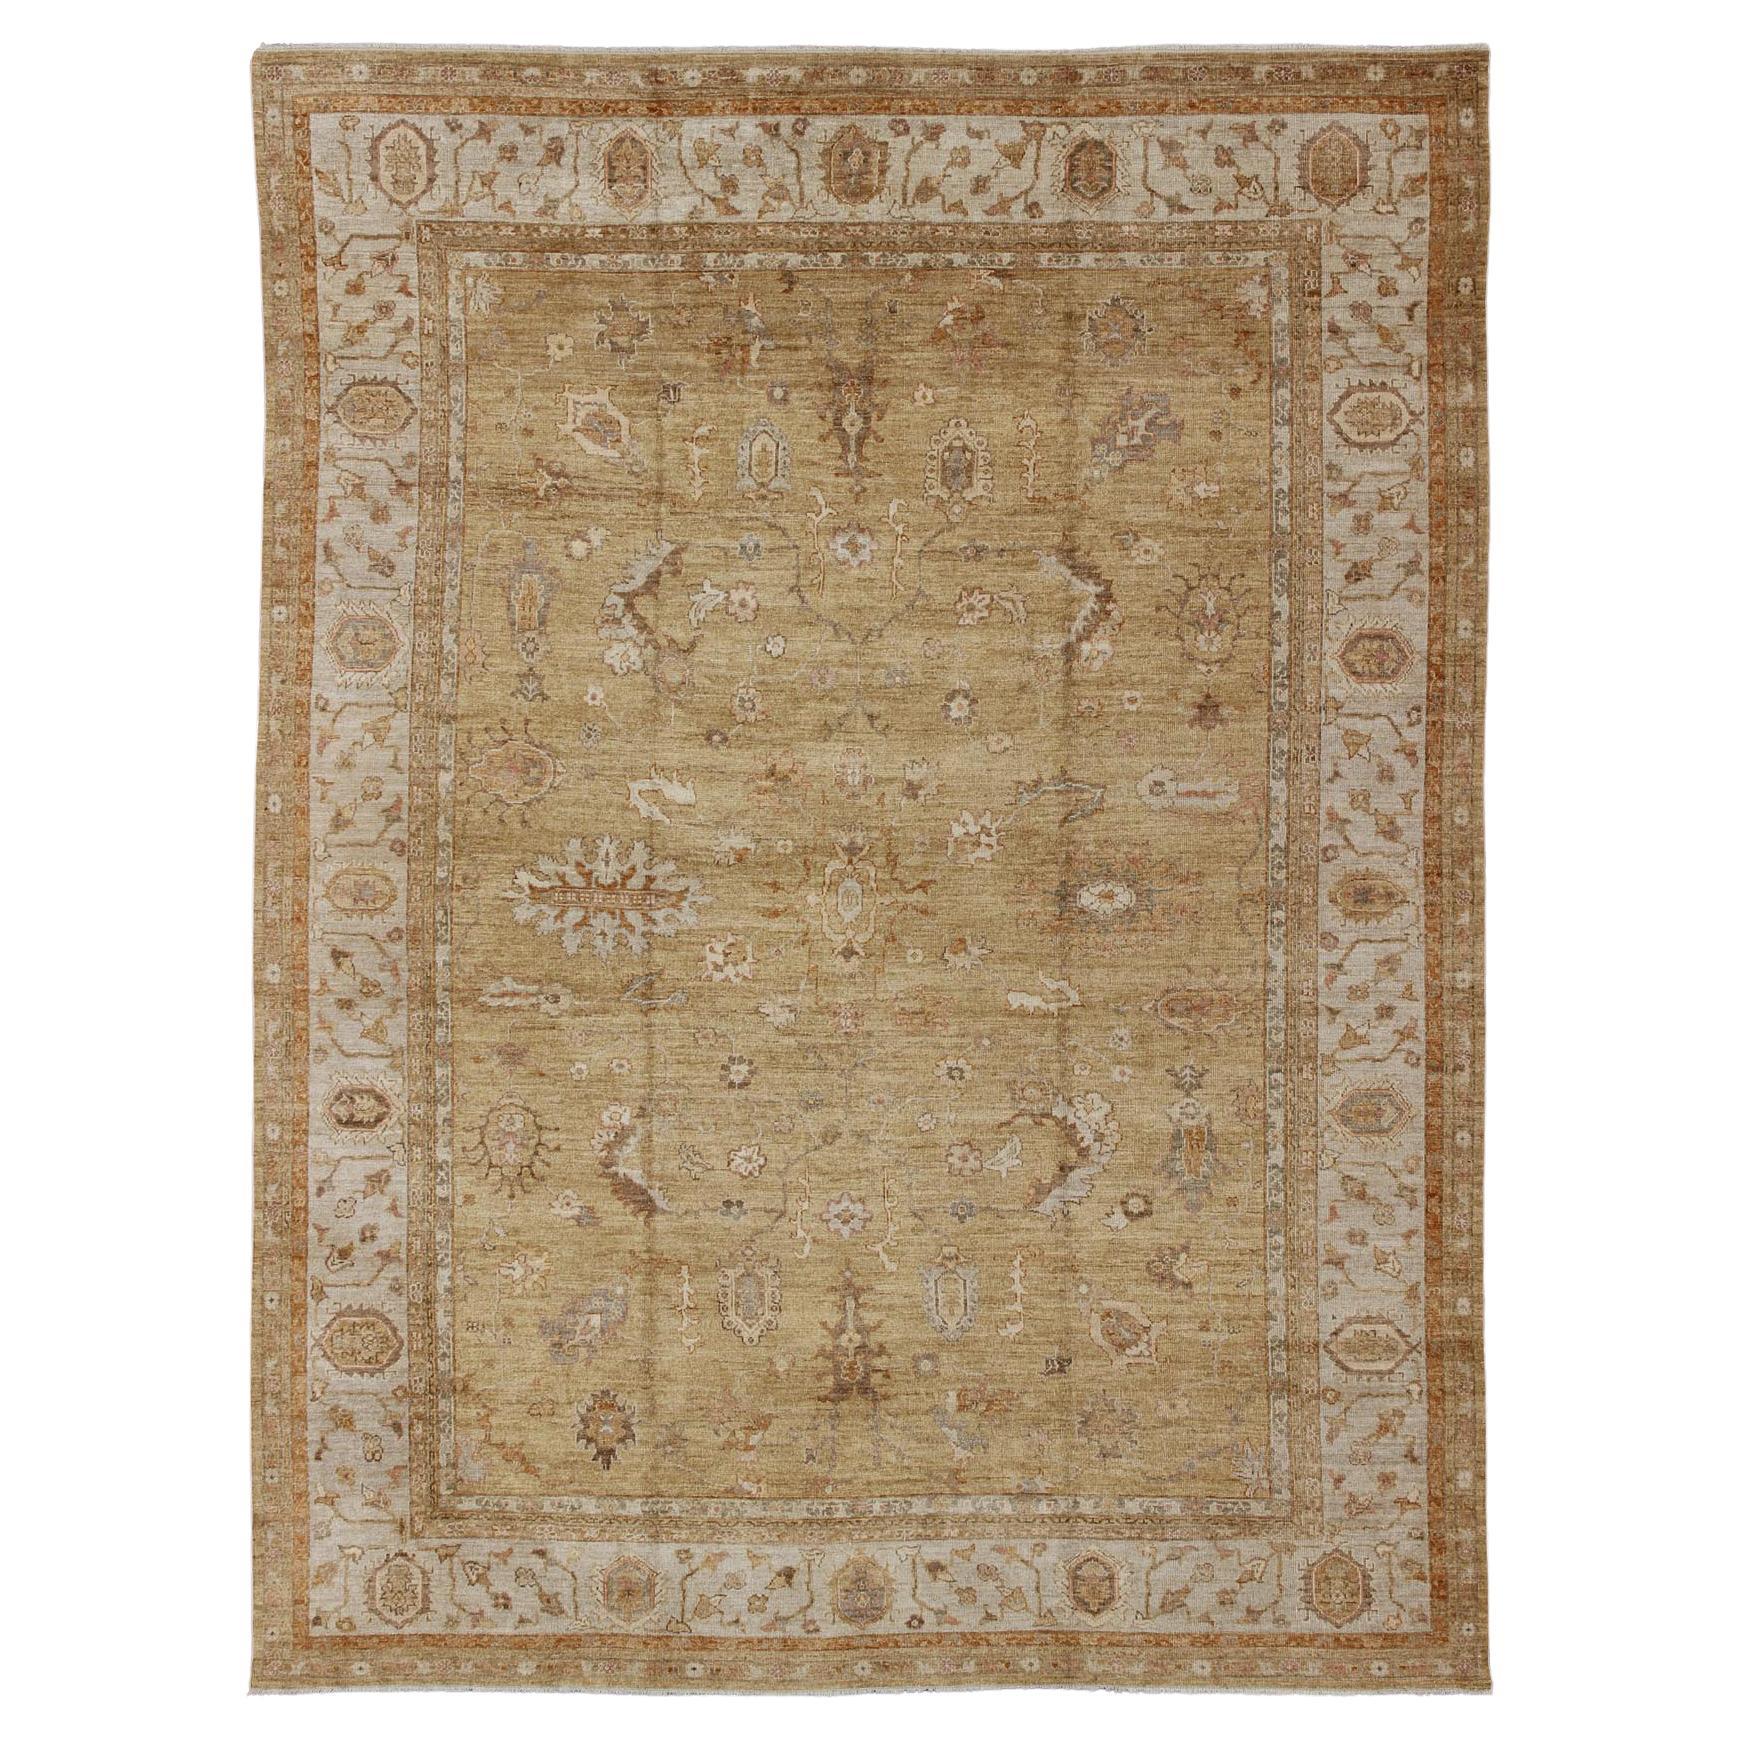 Large Angora Oushak Turkish Rug in Warm Colors of Taupe, Soft Gold, Brown, Cream